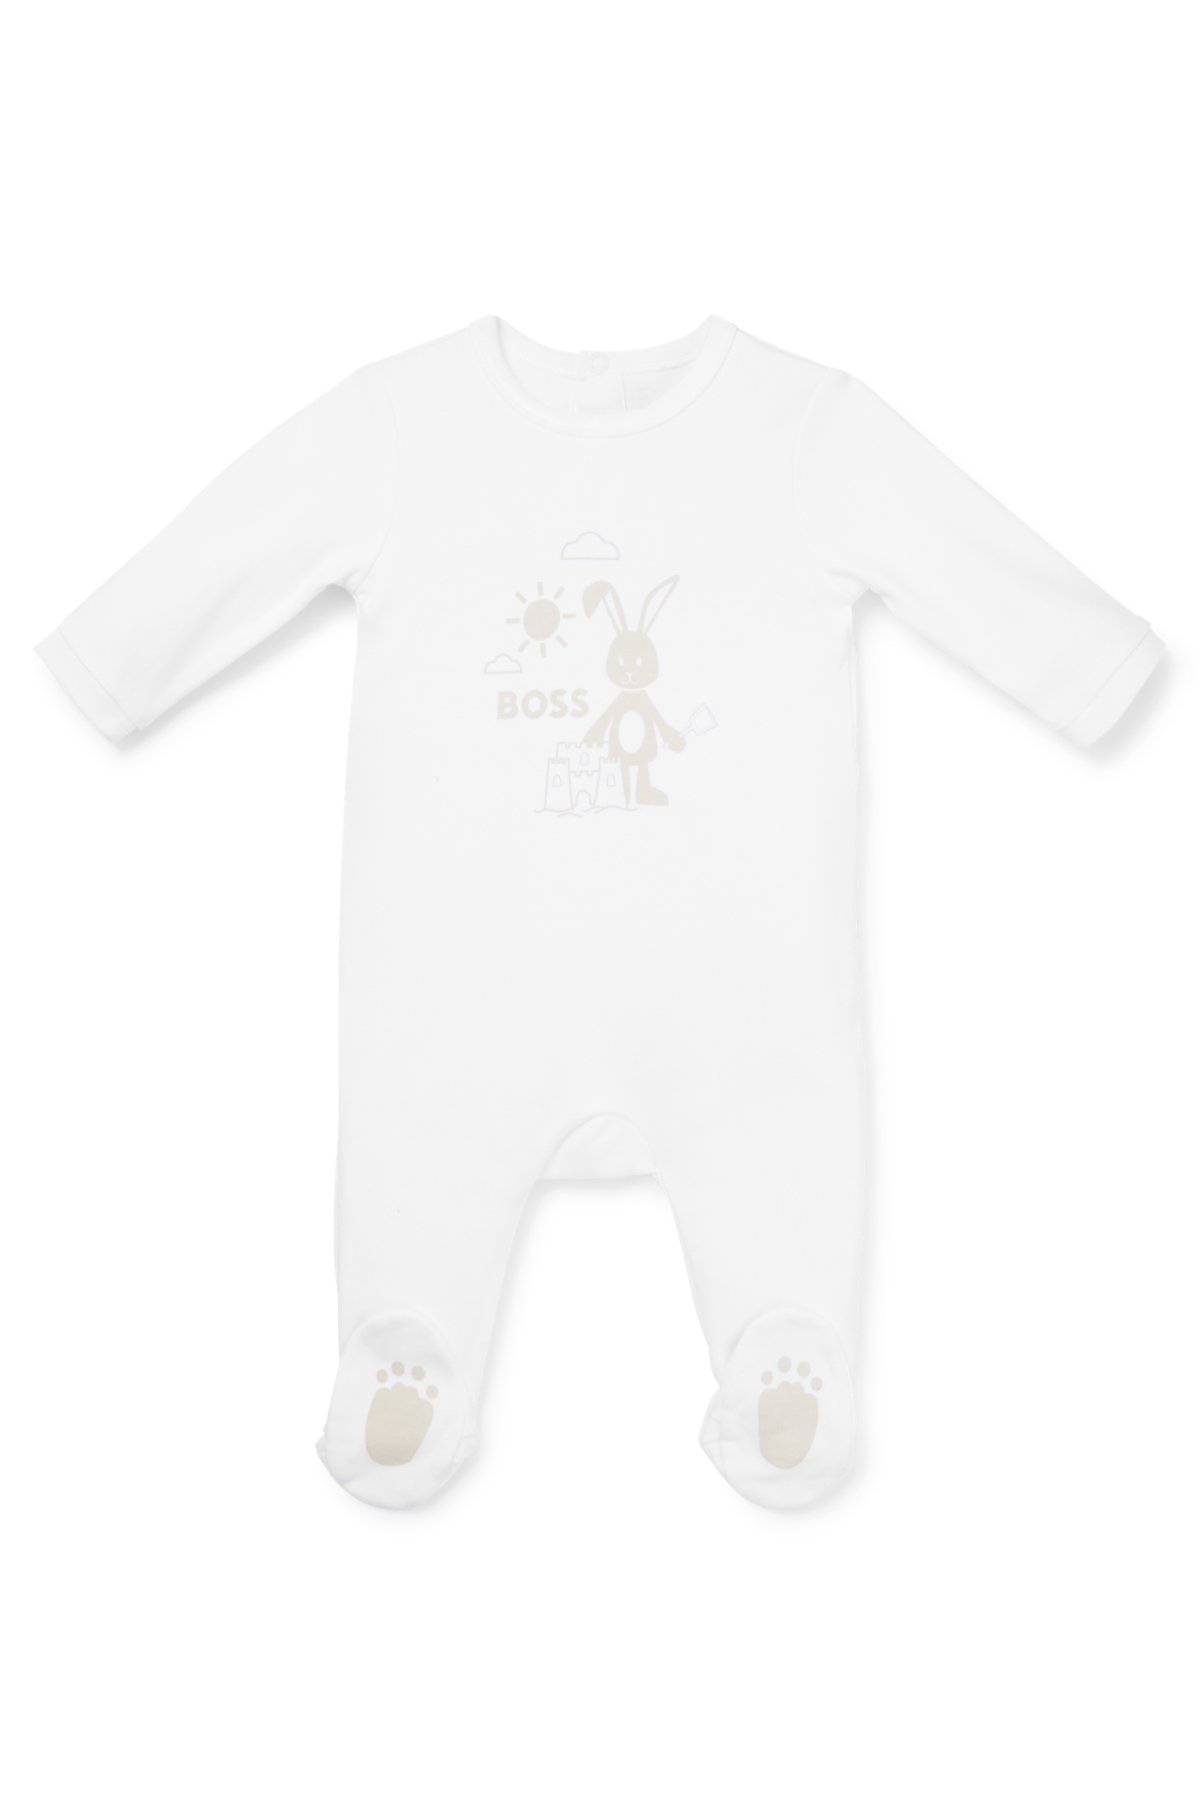 BOSS - Baby sleepsuit in with logo artwork